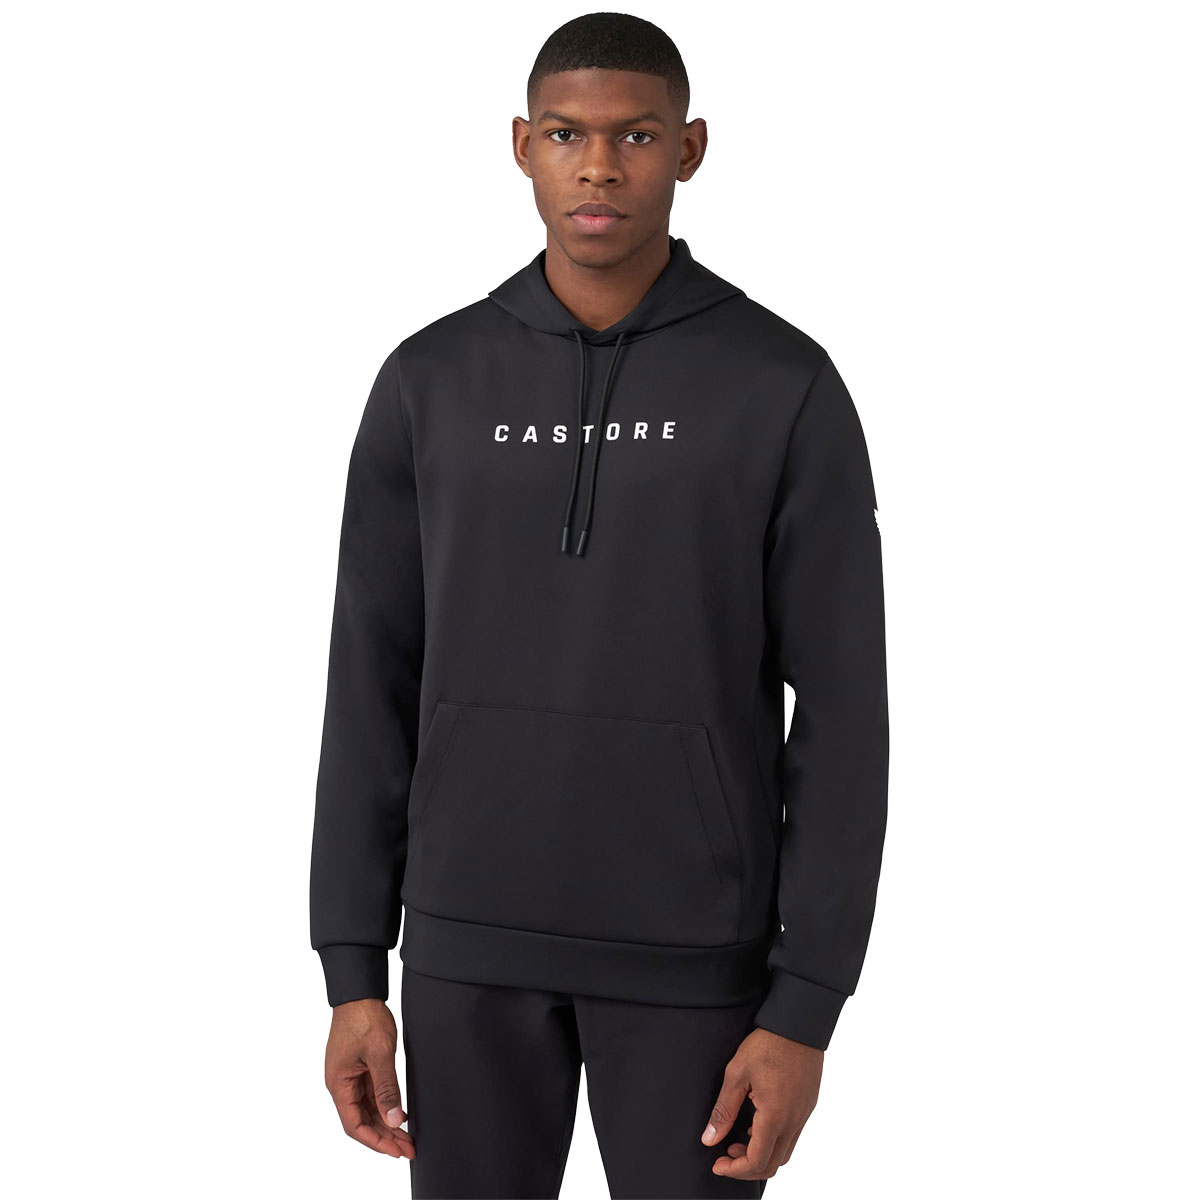 Castore Men's Limited-Edition Scuba Golf Hoodie from american golf